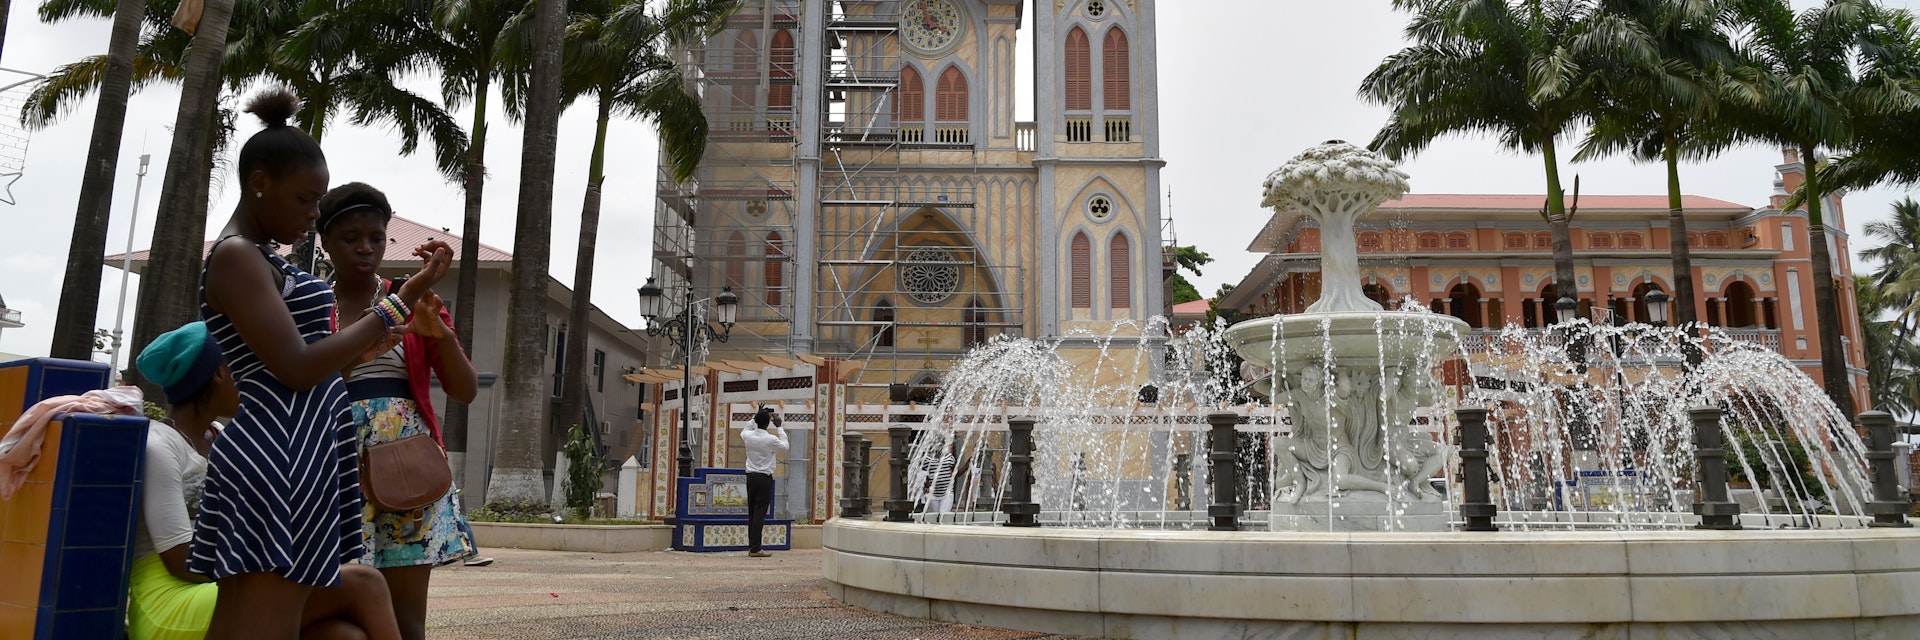 Photo taken on January 25, 2015 show the view of Malabo's Cathedral  in Equatorial Guinea. AFP PHOTO / ISSOUF SANOGO        (Photo credit should read ISSOUF SANOGO/AFP/Getty Images)